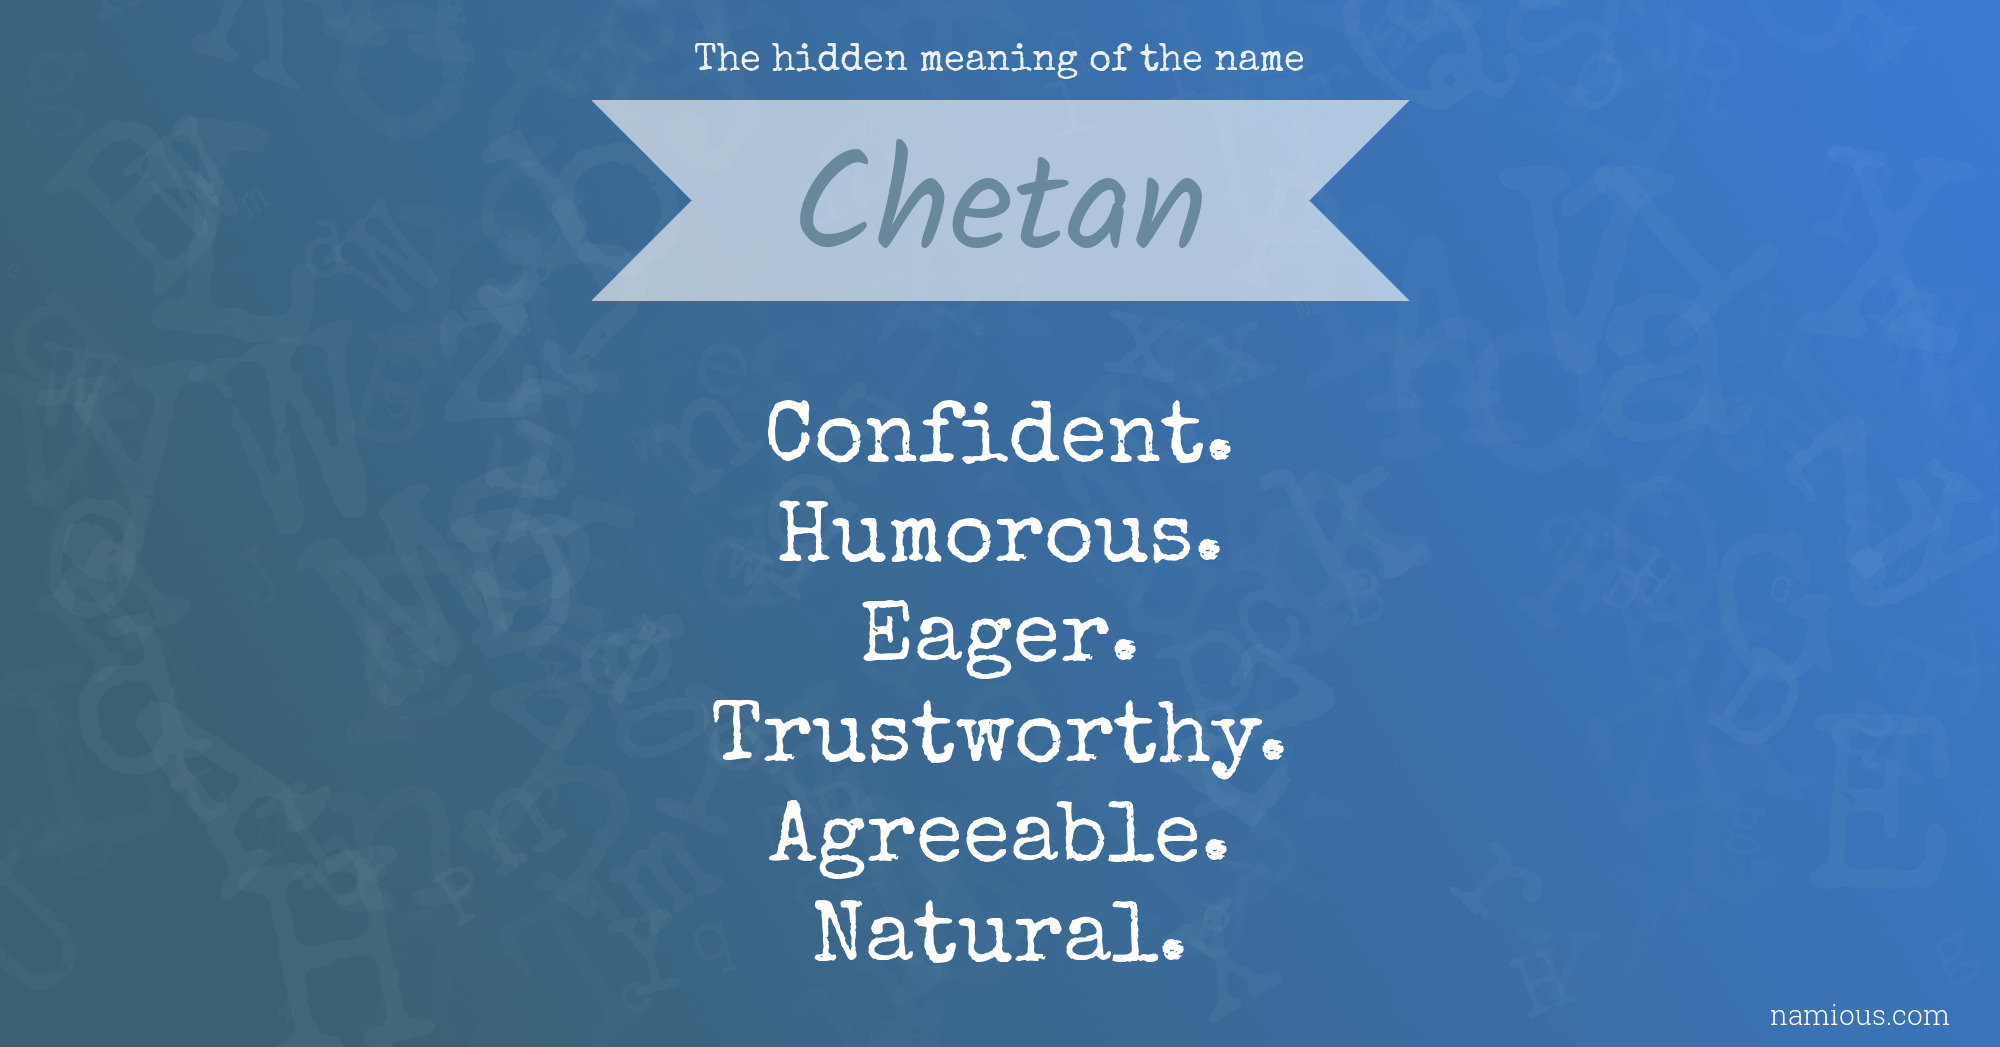 The hidden meaning of the name Chetan